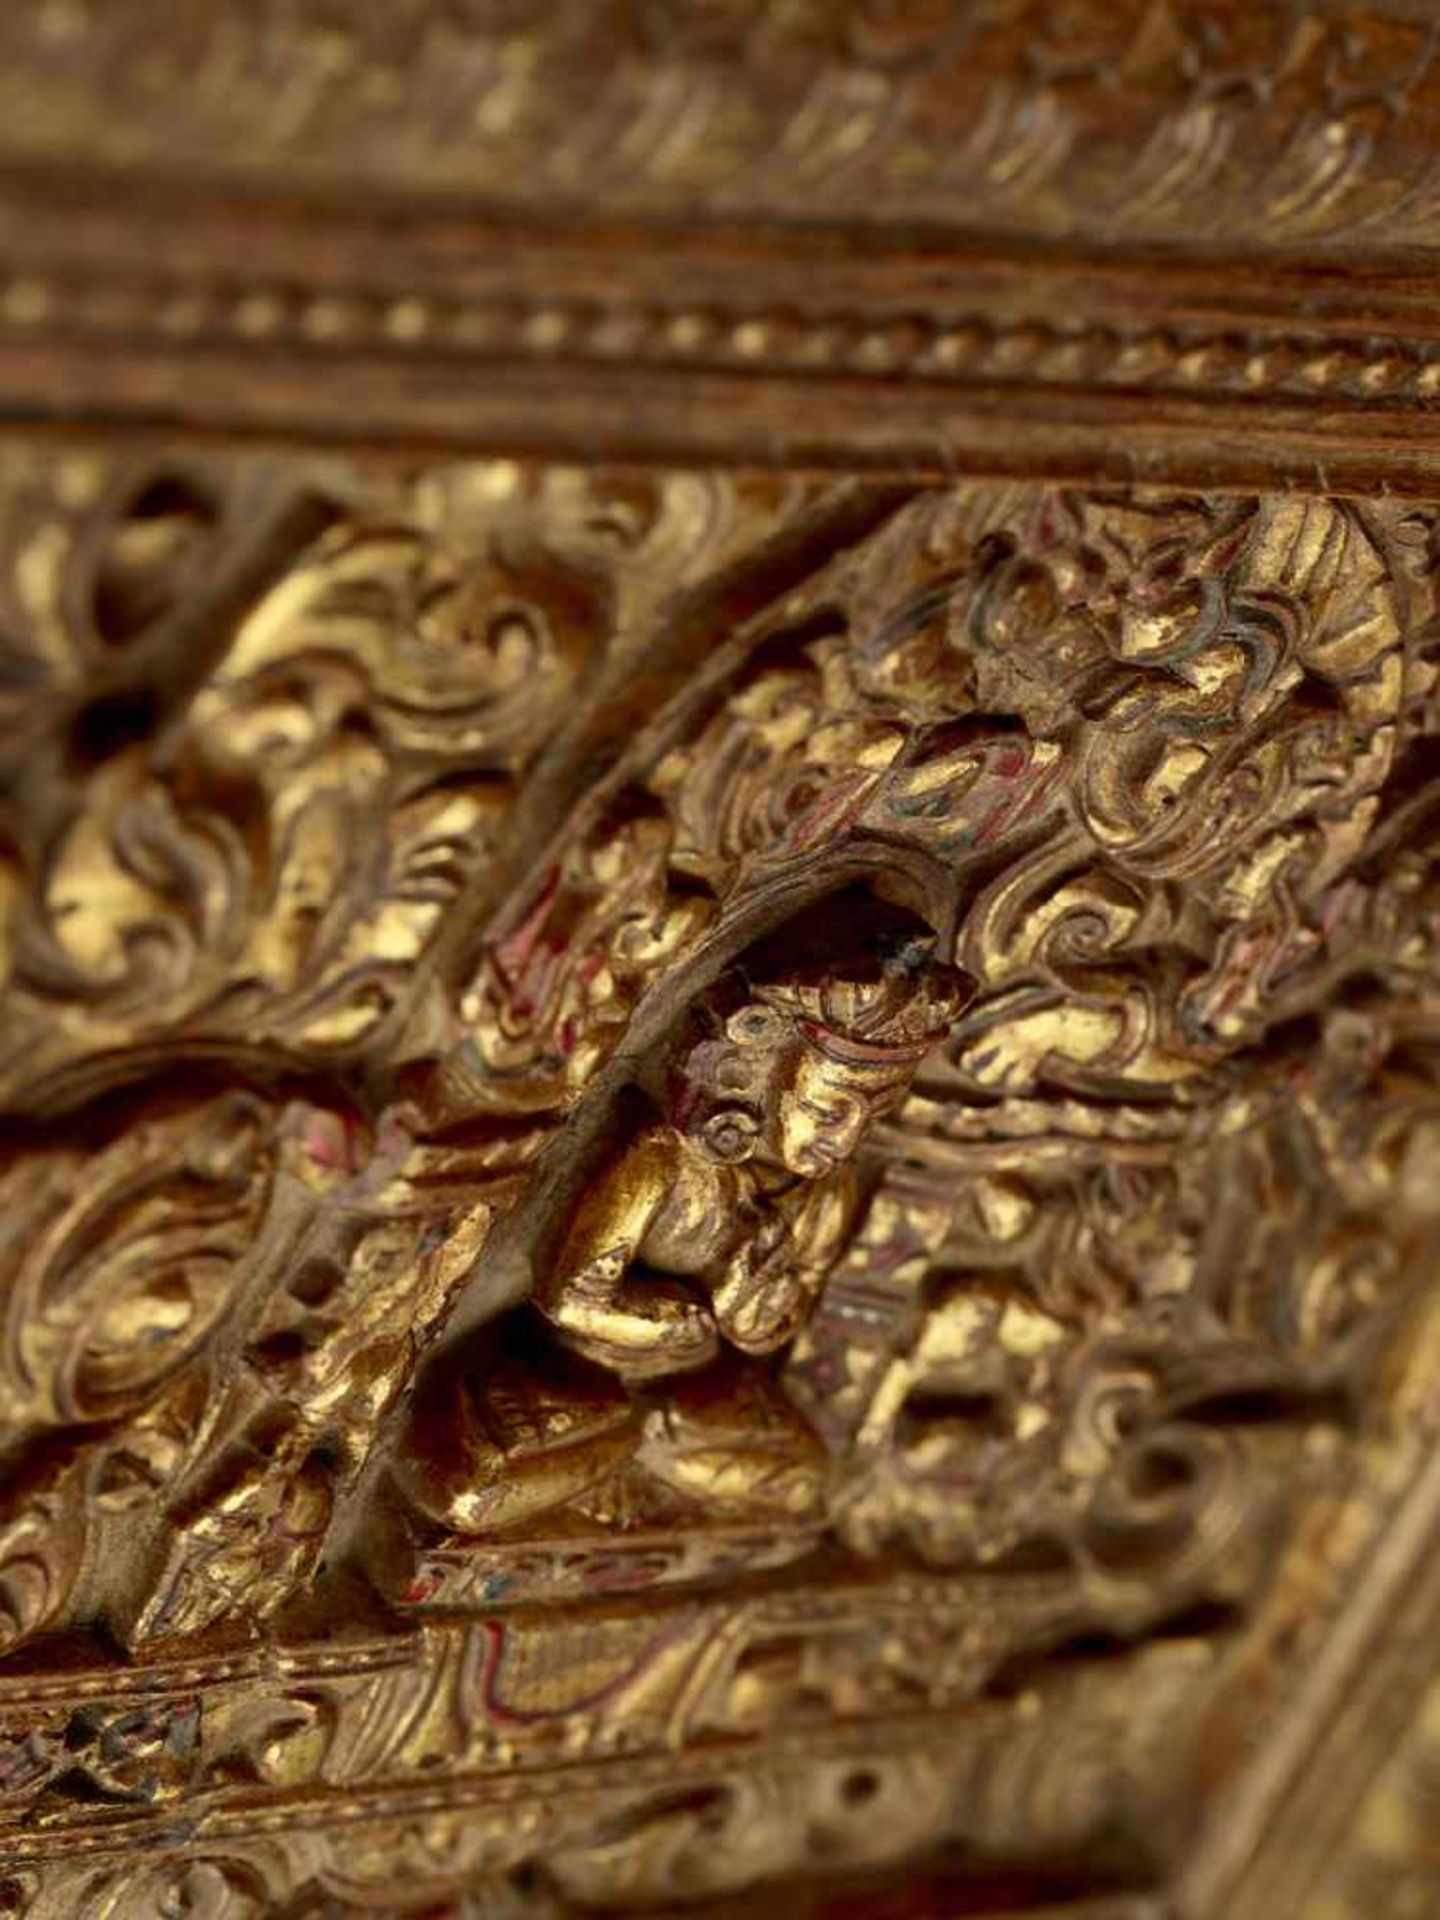 A RARE MANUSCRIPT COVER 17TH CENTURY Tibet, 17th - earlier 18th century. The finely carved and - Bild 3 aus 5